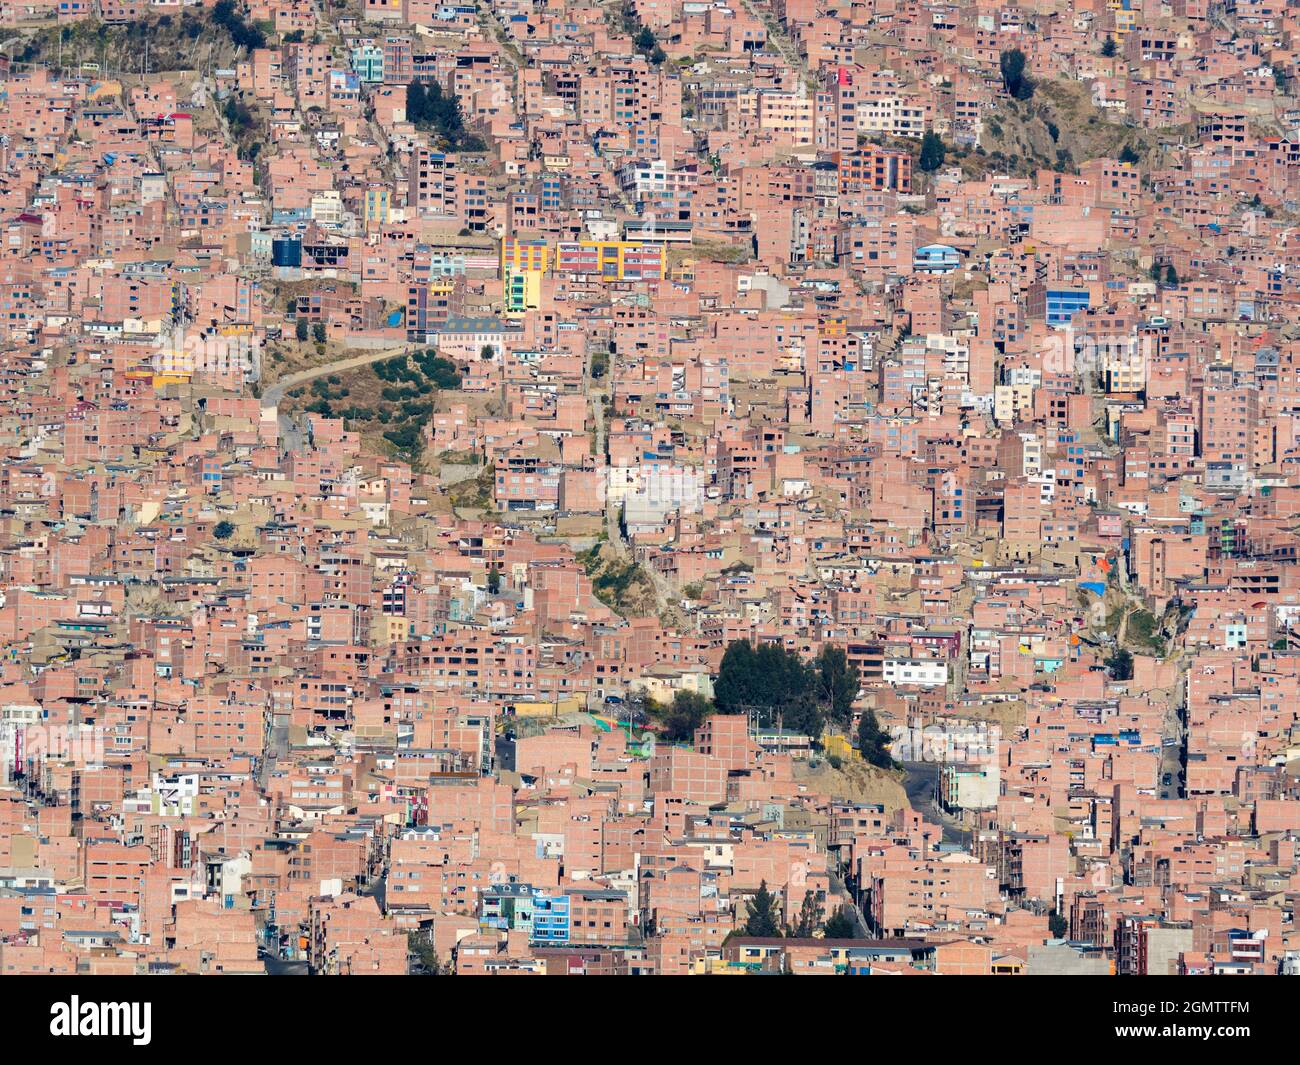 La Paz, Bolivia - 19/20 May 2018   At an elevation of roughly 3,650 m (11,975 ft) above sea level, La Paz - the de facto capital of Bolivia - is the h Stock Photo